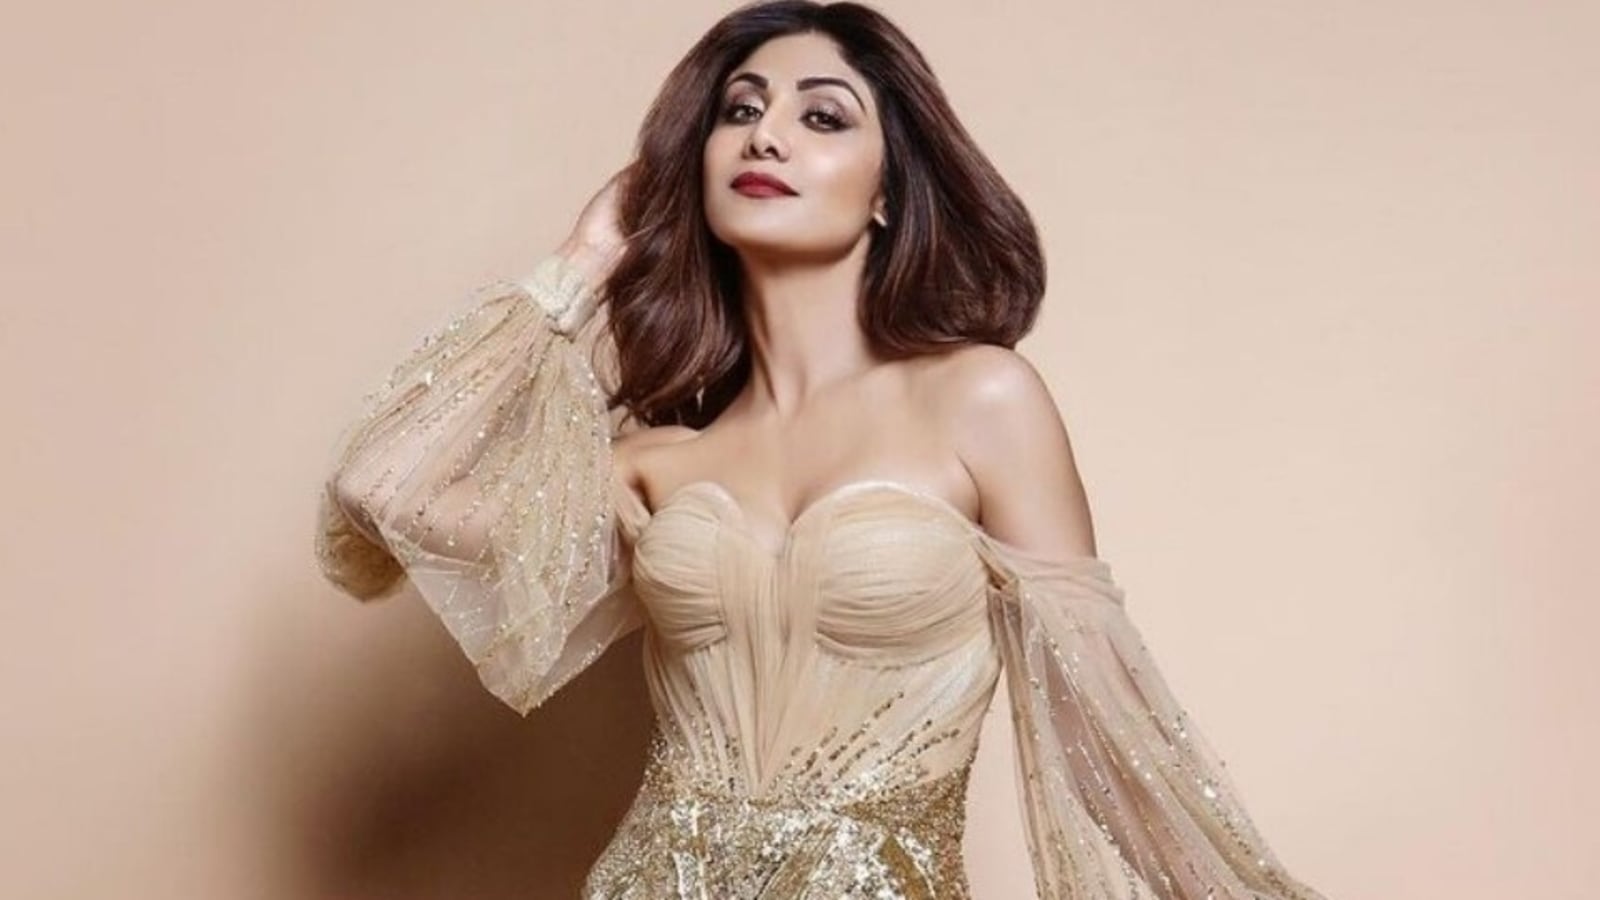 Shilpa Shetty Ki Sex - Sparkle on, darling: Shilpa Shetty in nude shimmery gown gives us a  retro-chic moment | Fashion Trends - Hindustan Times